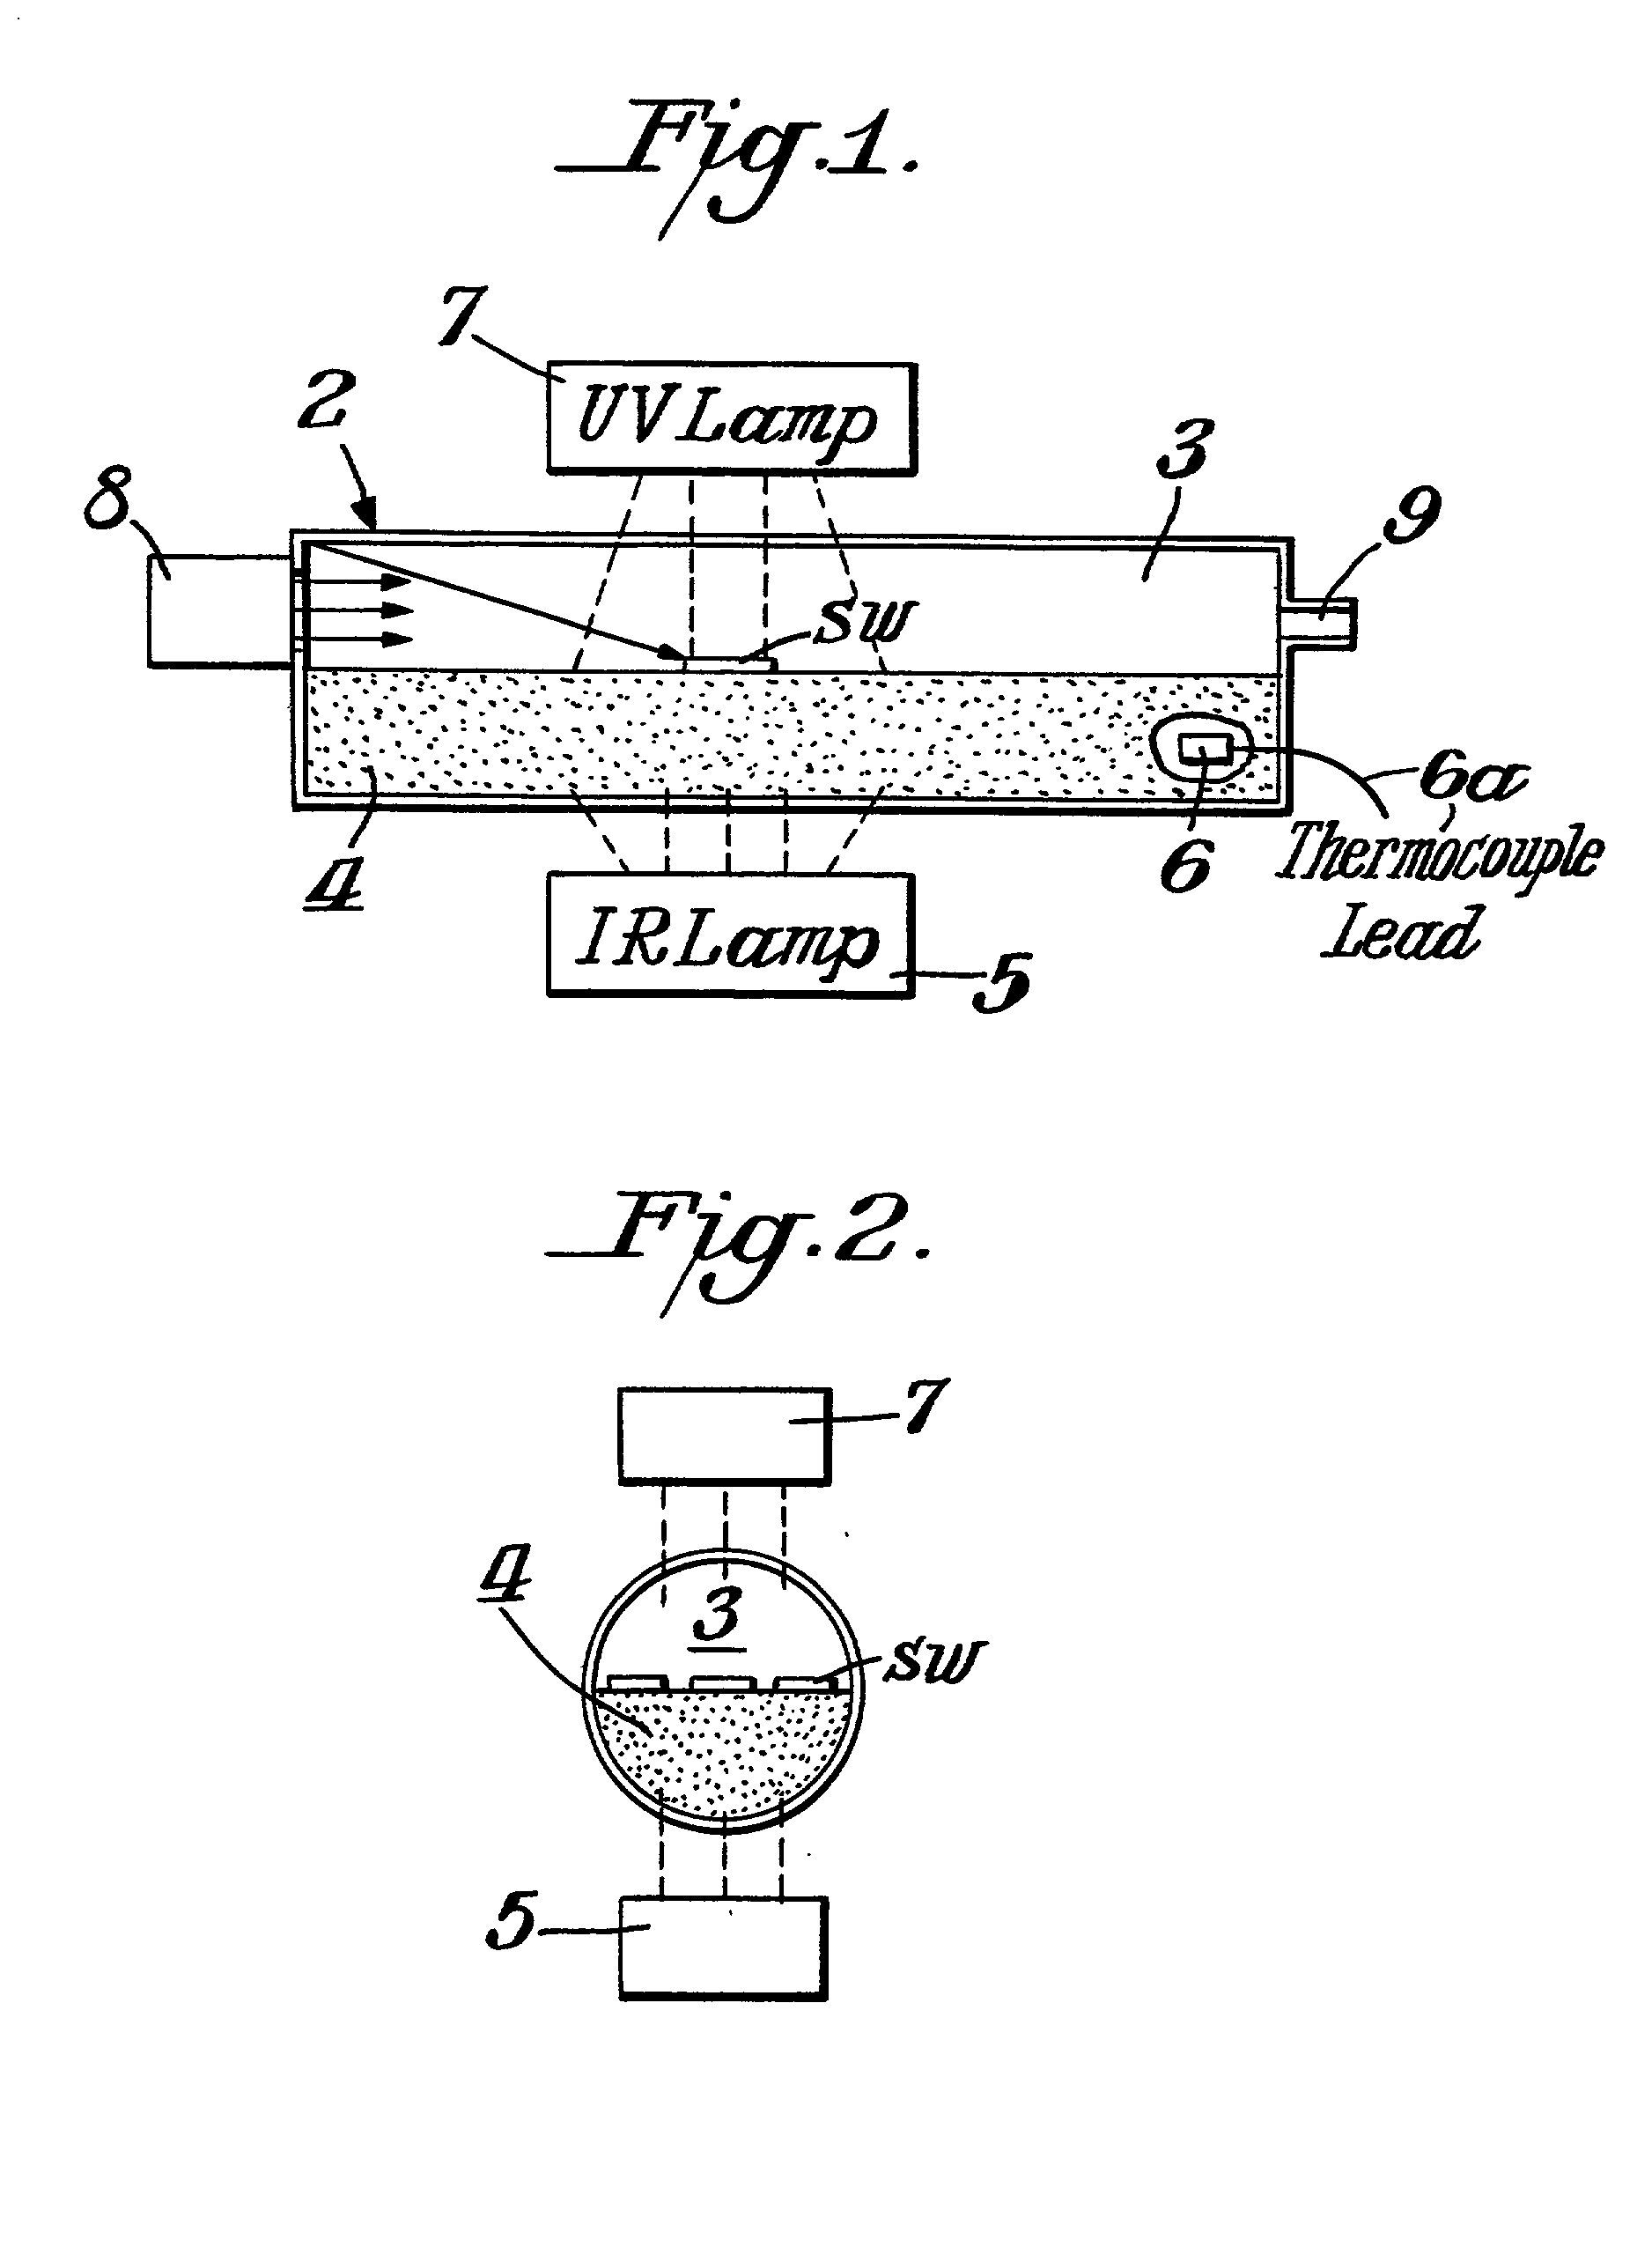 Apparatus for removing native oxide layers from silicon wafers